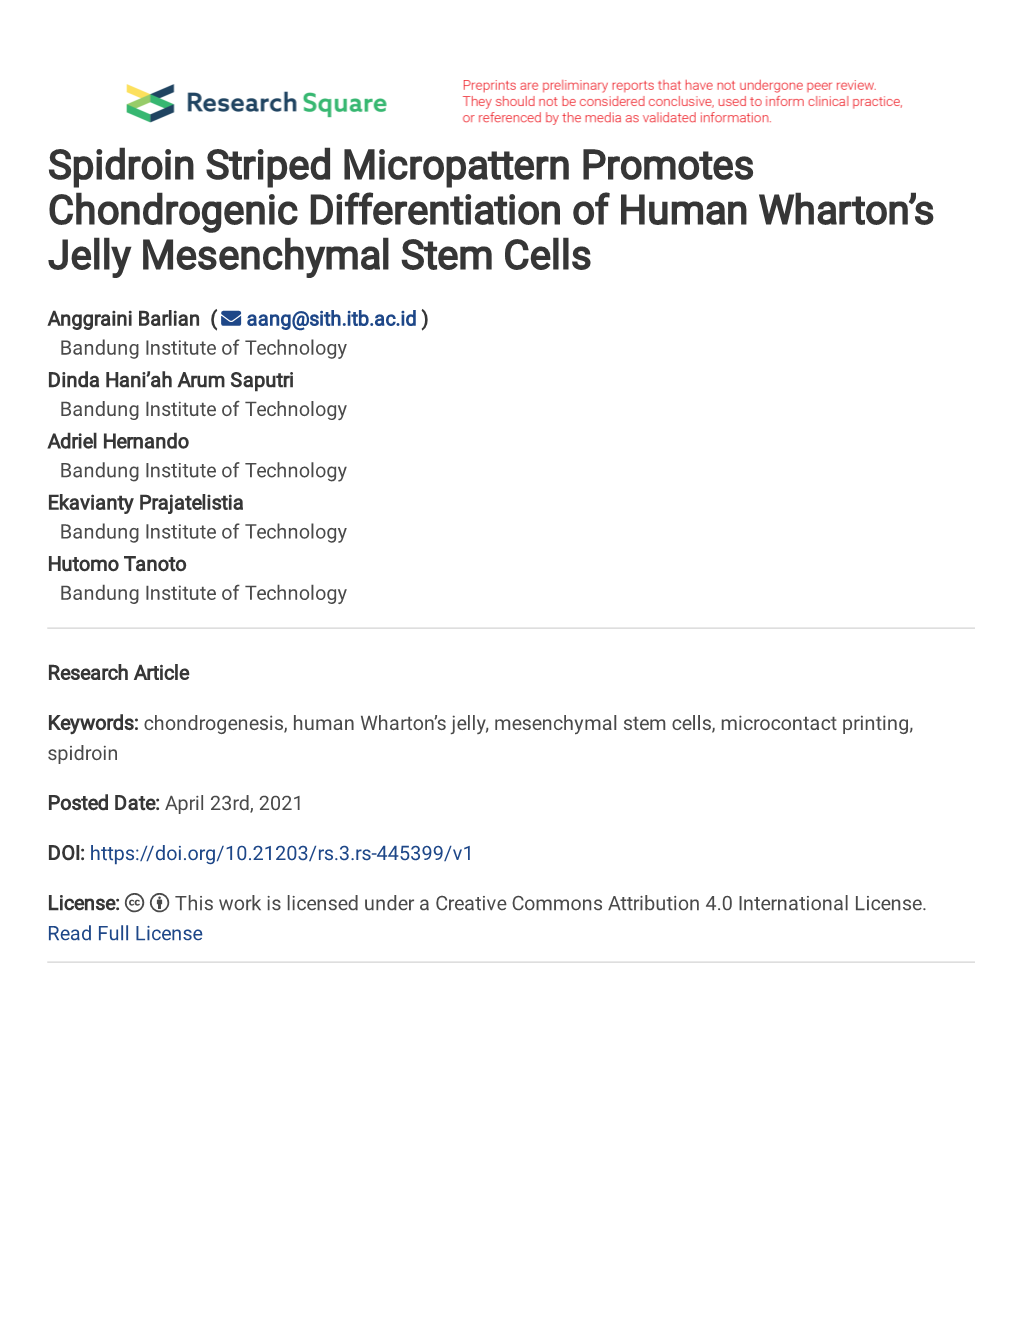 Spidroin Striped Micropattern Promotes Chondrogenic Differentiation of Human Wharton's Jelly Mesenchymal Stem Cells